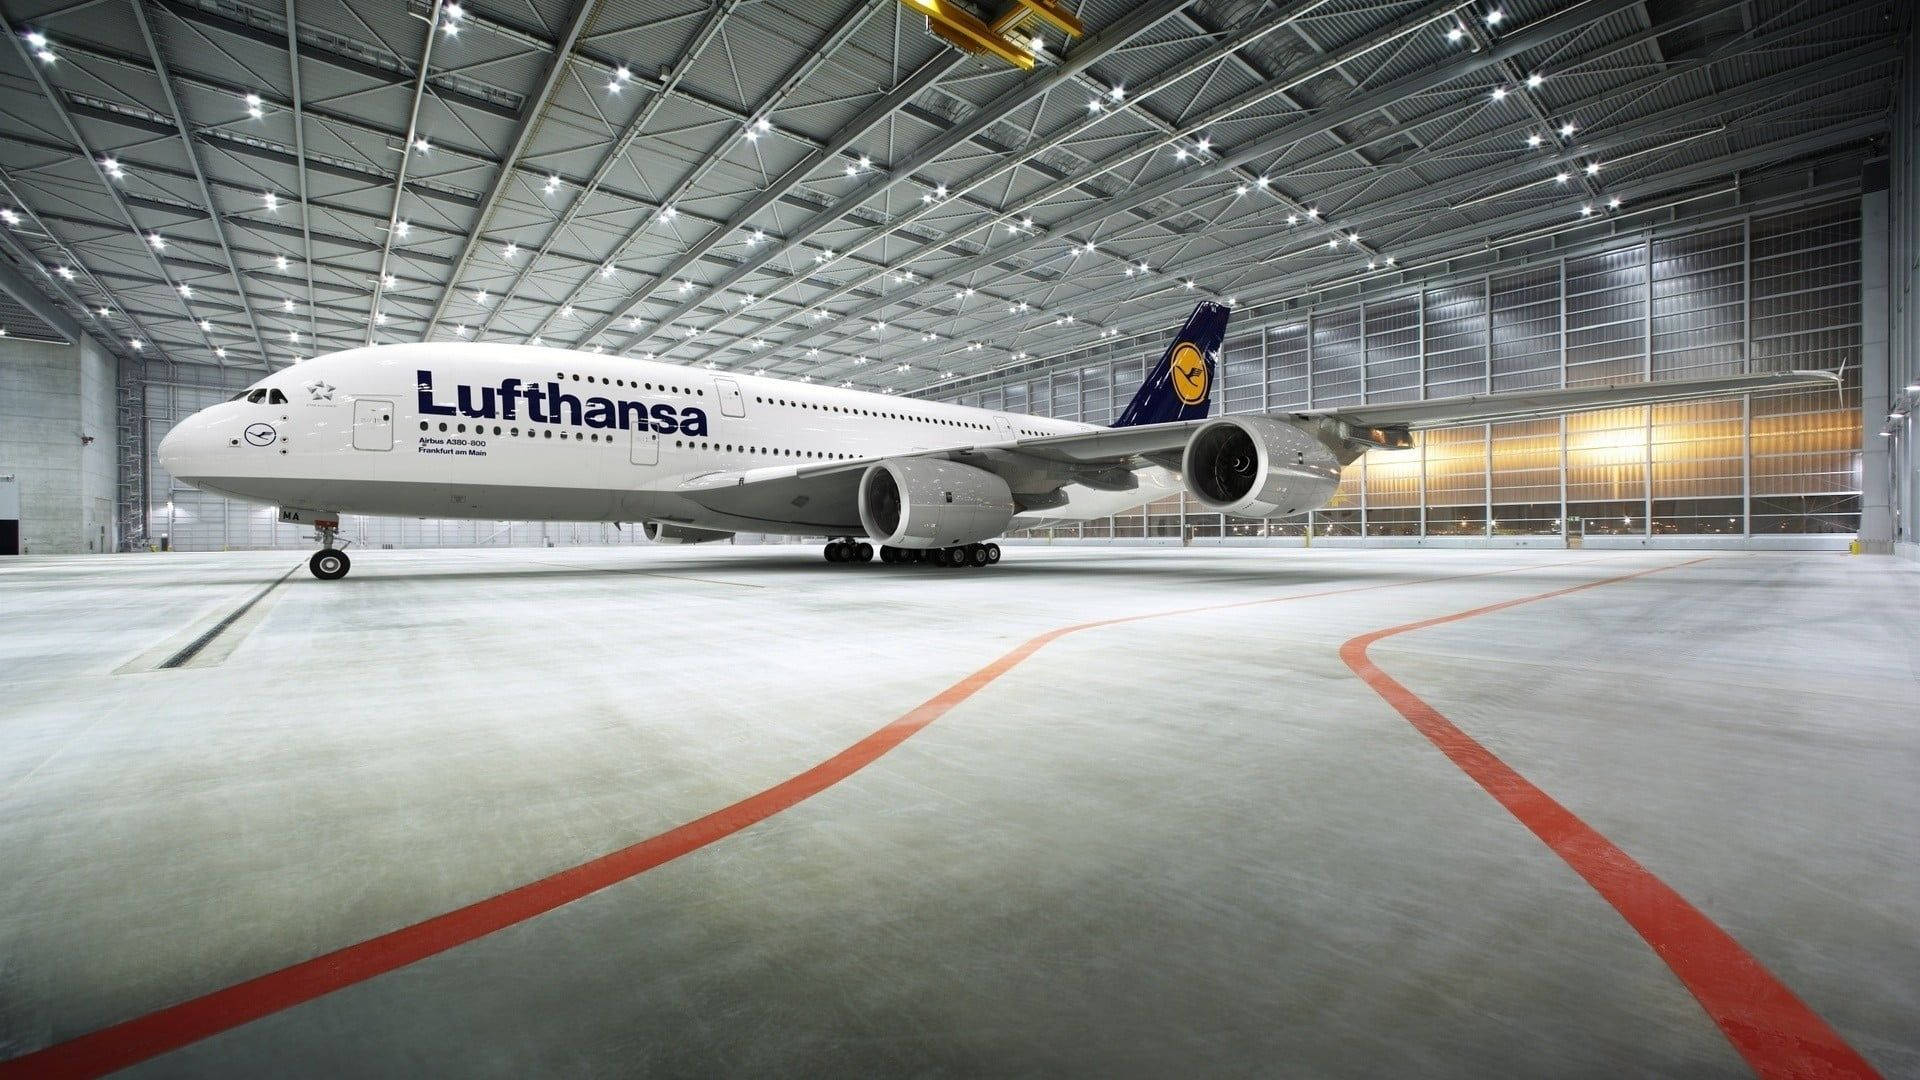 Lufthansa Plane Within A Hangar Picture